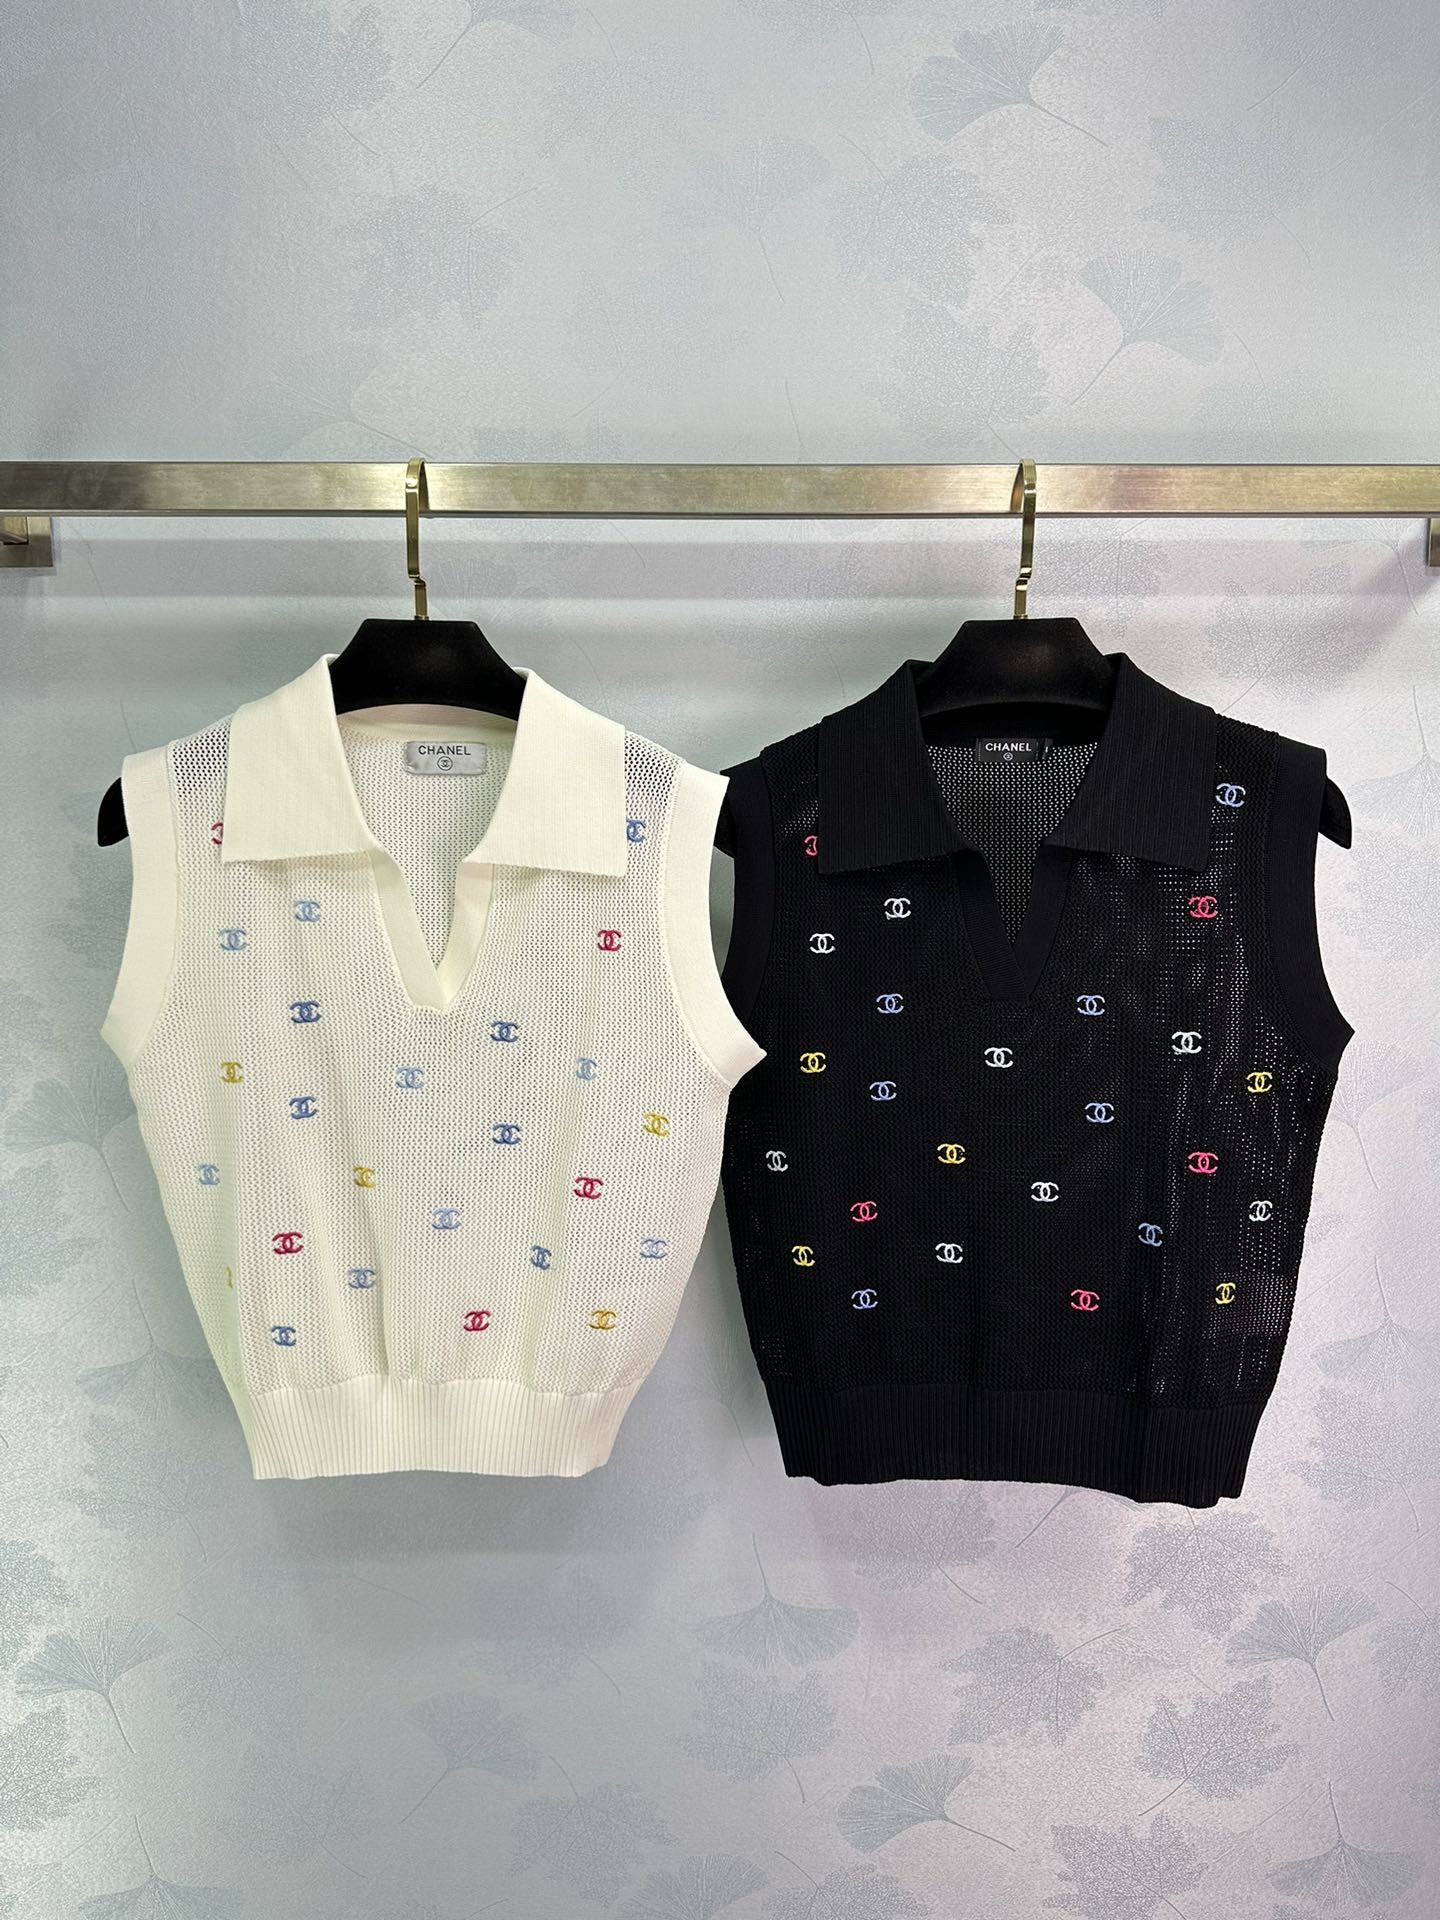 Chanel Clothing Tank Tops&Camis Embroidery Knitting Spring Collection